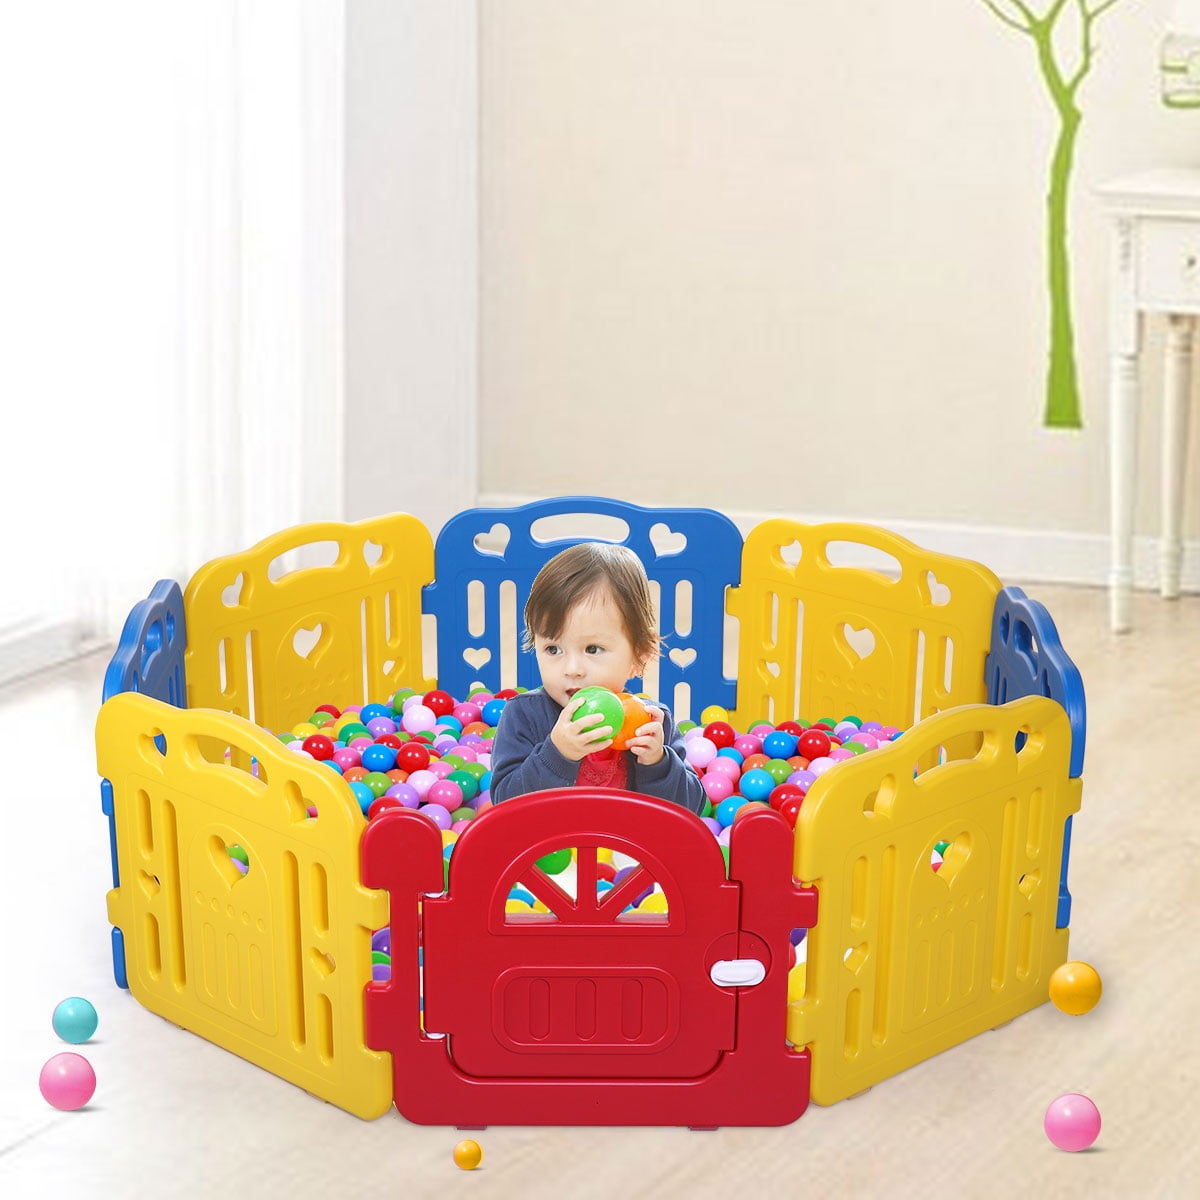 Baby Playpen 8 Panel Kids Safety Play Center Yard Home Indoor Outdoor Fence New 